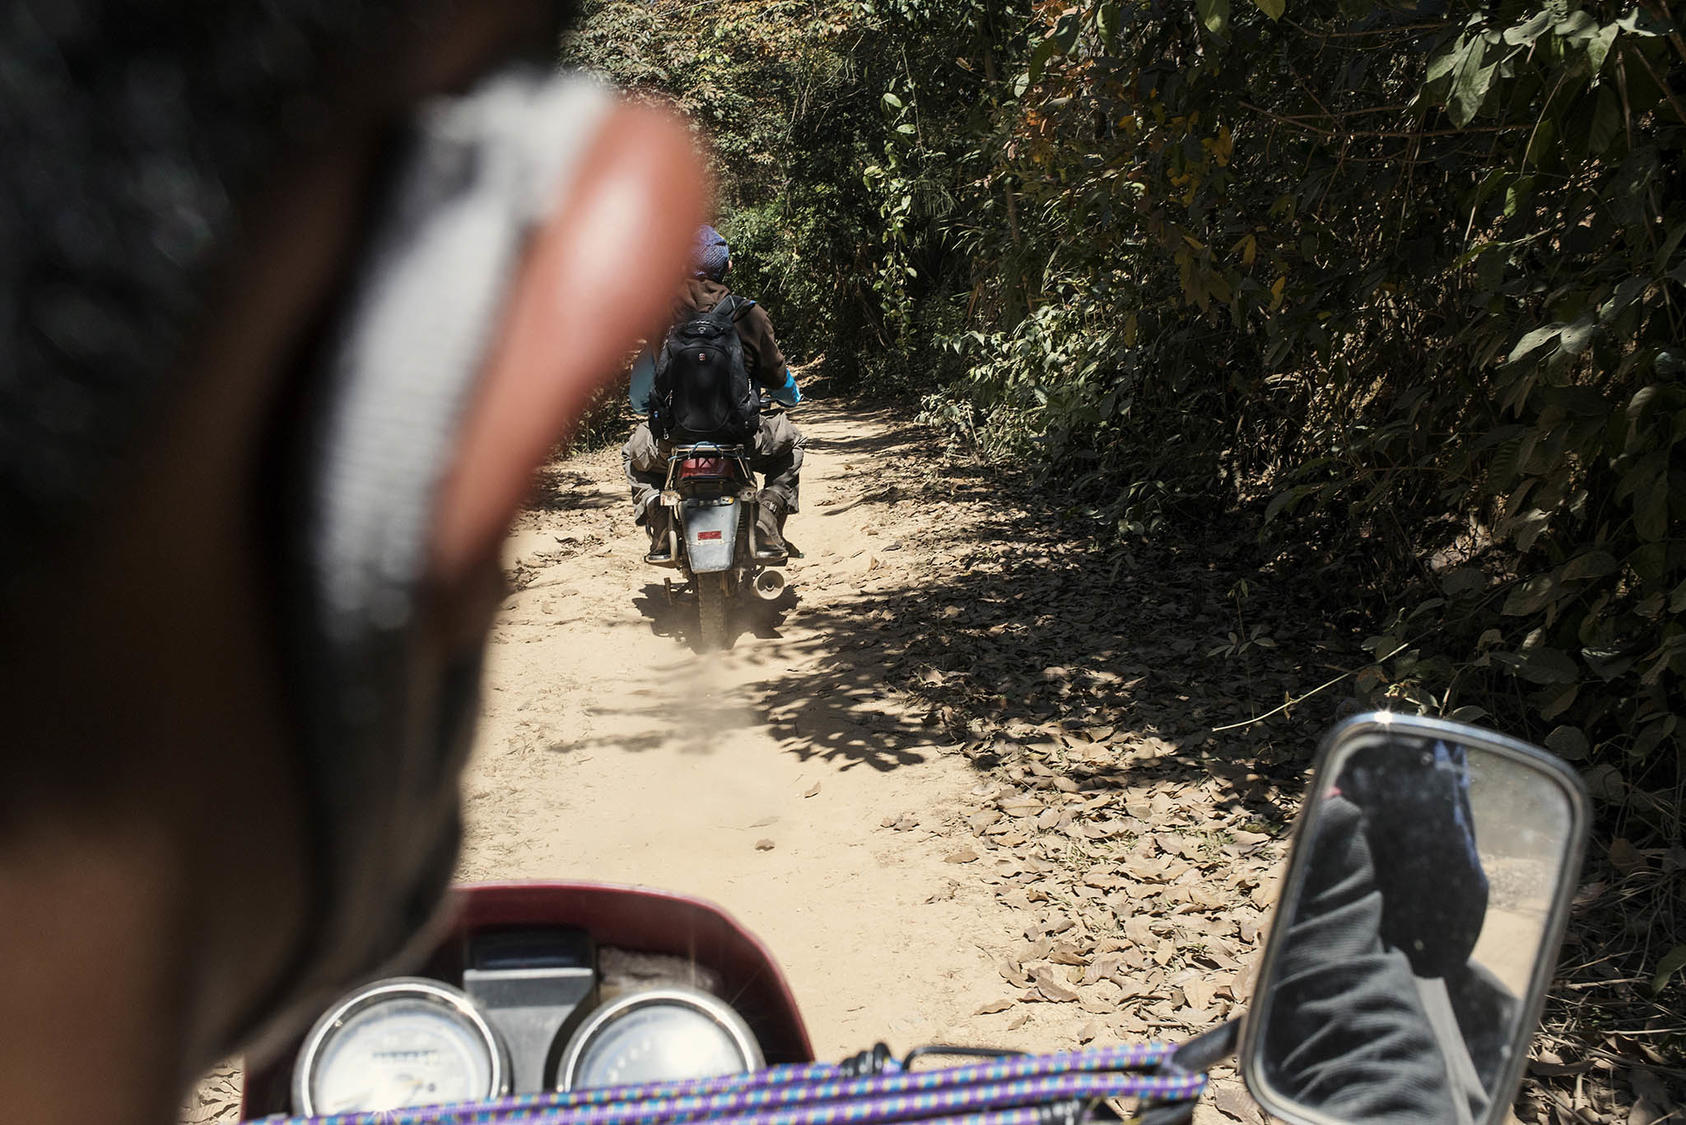 Chinese visitors are taken into Myanmar by motorbikes to avoid Chinese border controls near Mong La, Myanmar, Feb. 6, 2014. Since Myanmar’s 2021 coup, illegal activity across the border has skyrocketed. (Gilles Sabrie/The New York Times)